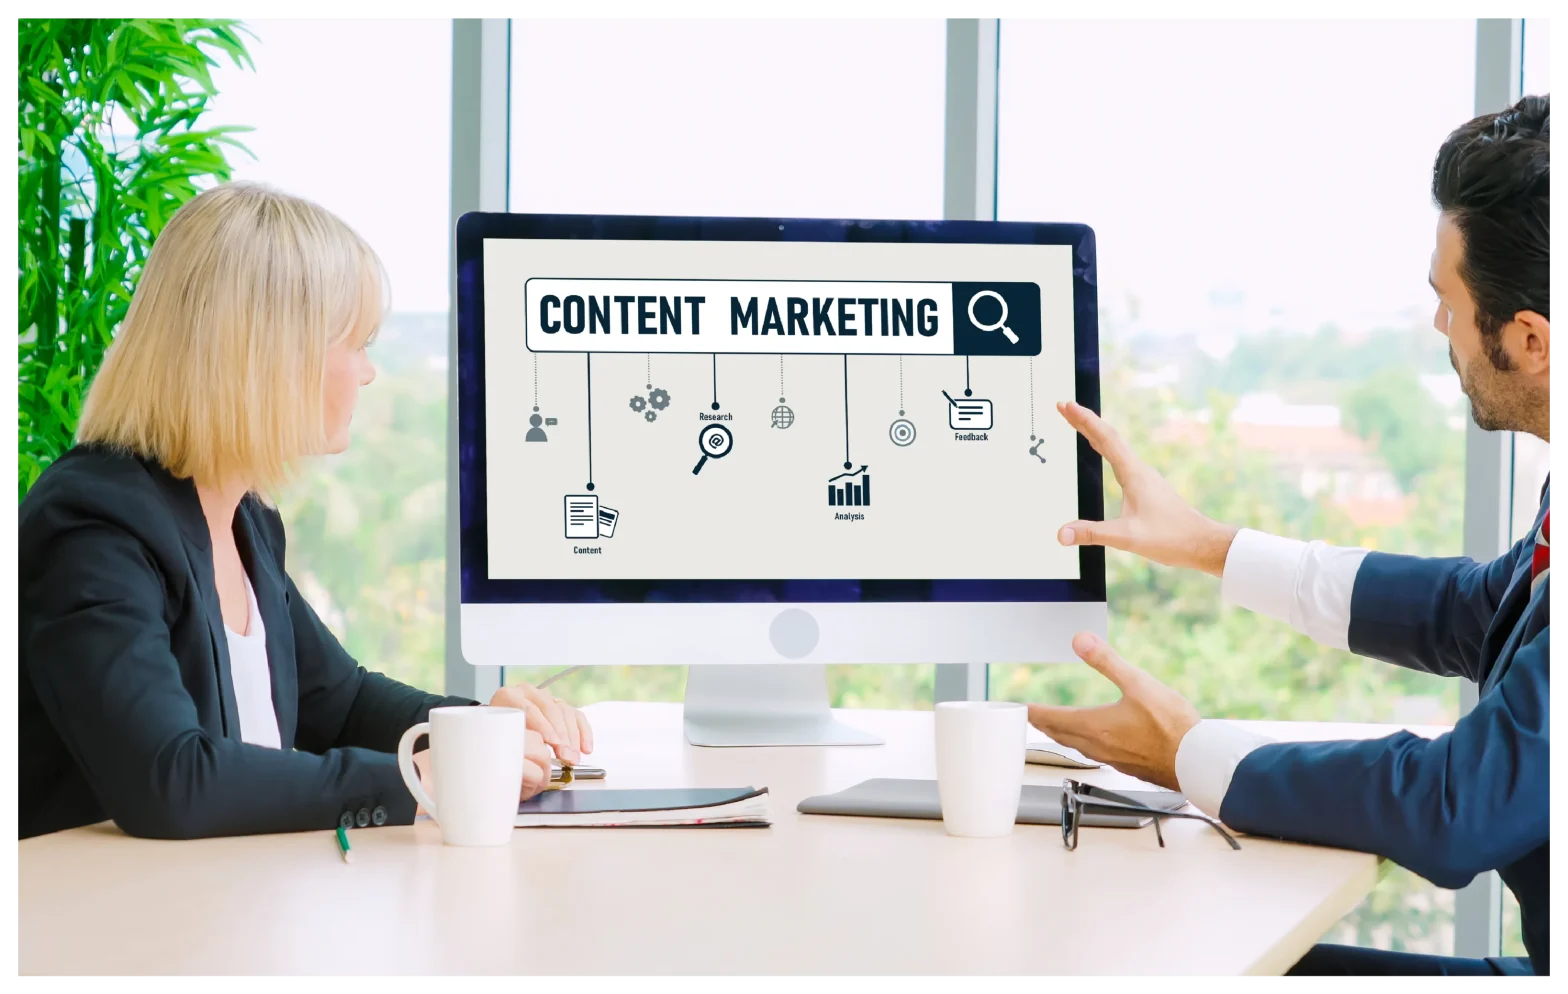 Content Marketing Tips for B2B Businesses - Backed By Industry Experts